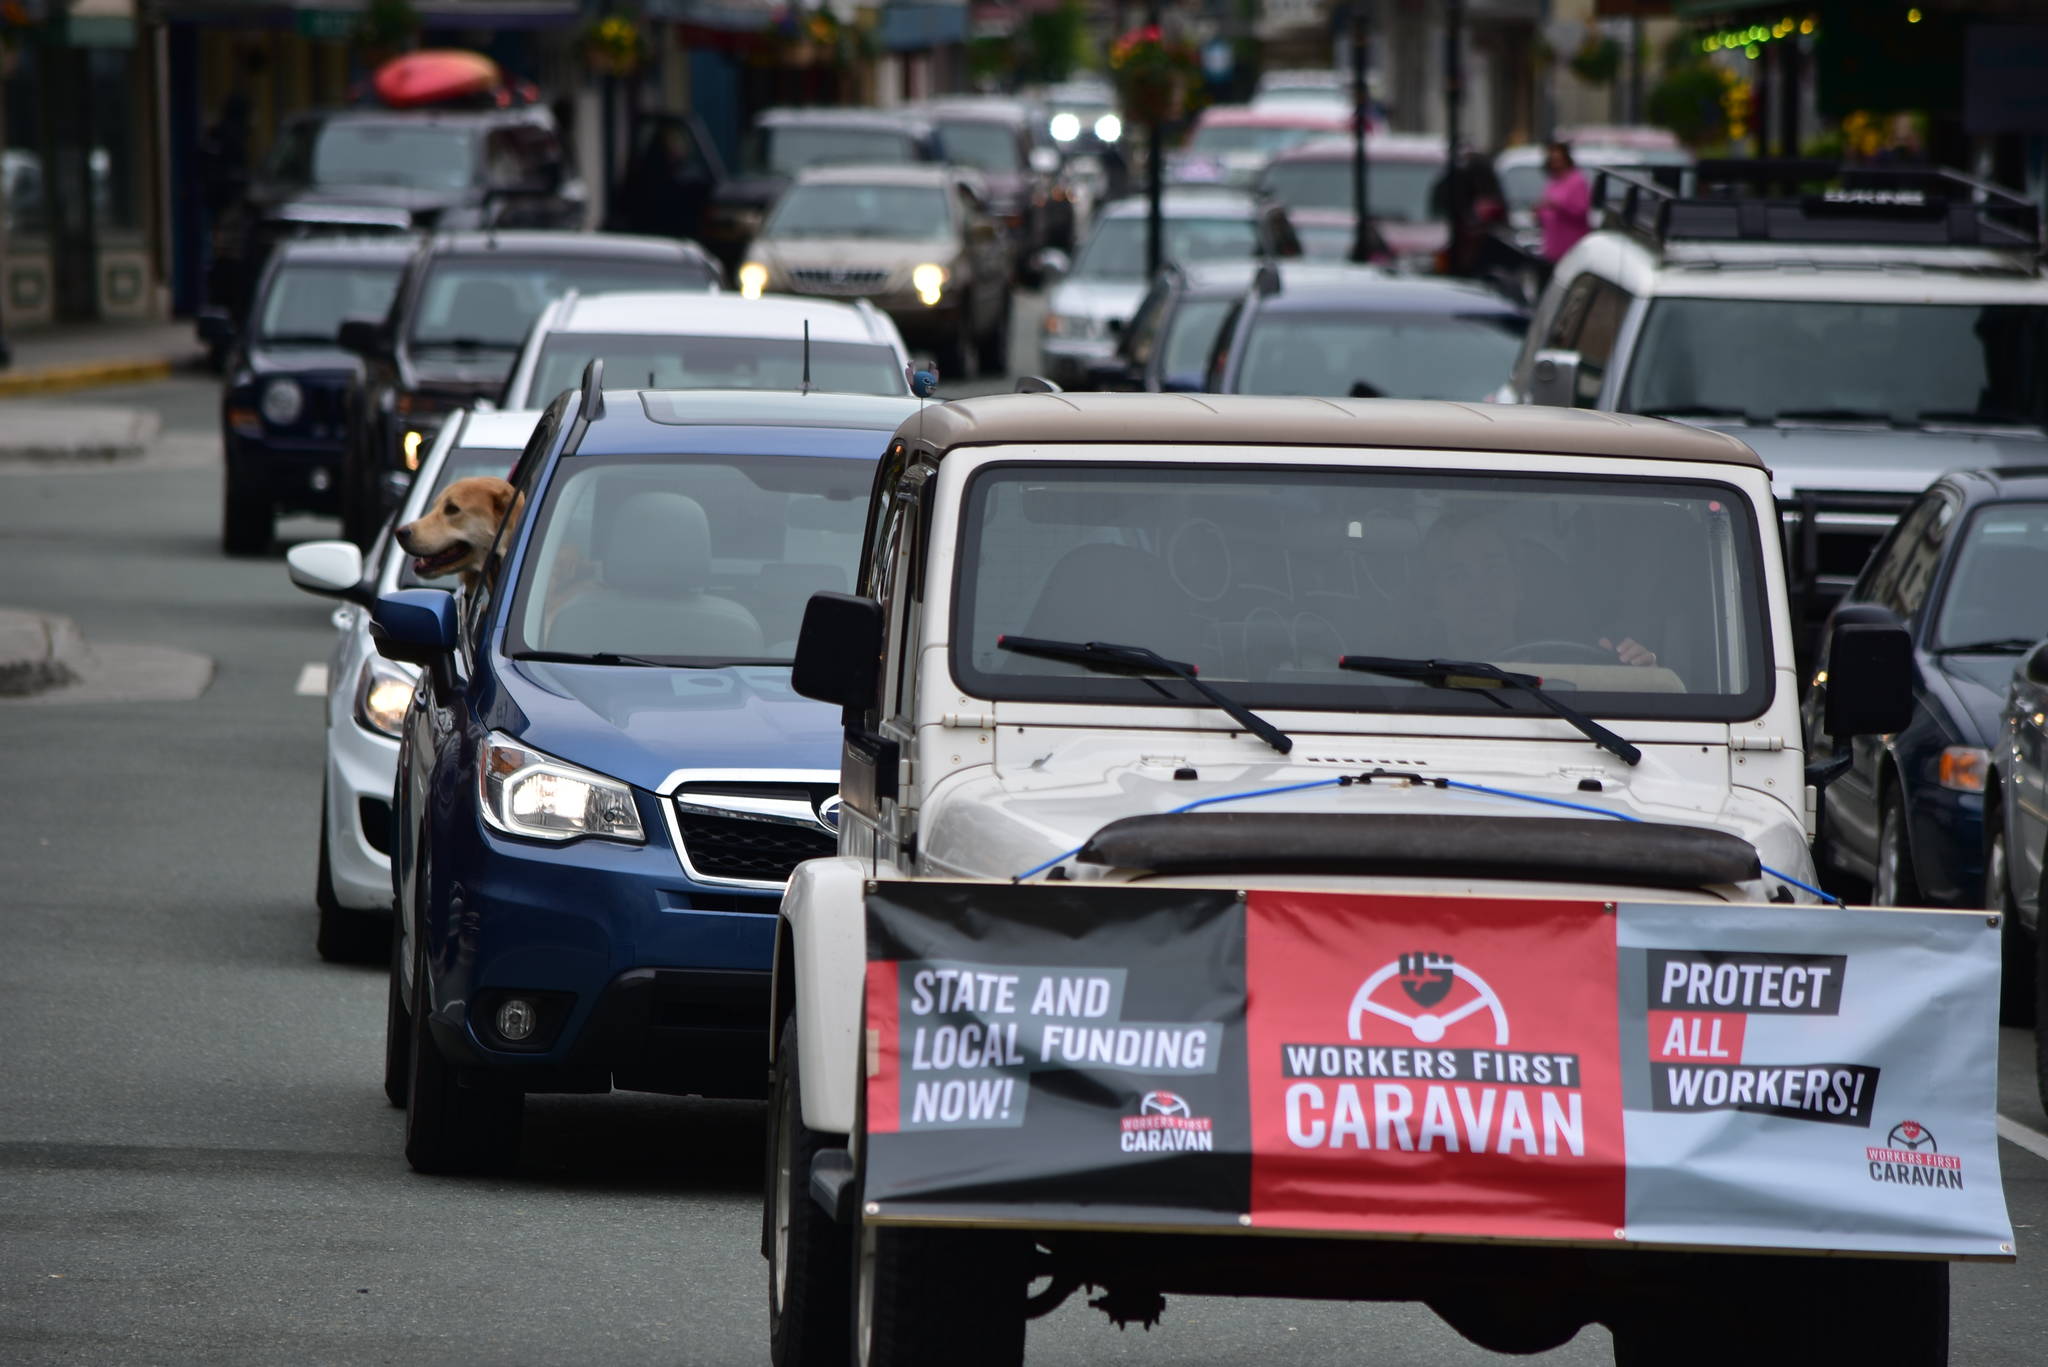 A caravan of union workers and their supporters drive through downtown Juneau on Wednesday, June 17, 2020, as part of a nation protest in support of workers during the COVID-19 pandemic. (Peter Segall | Juneau Empire)